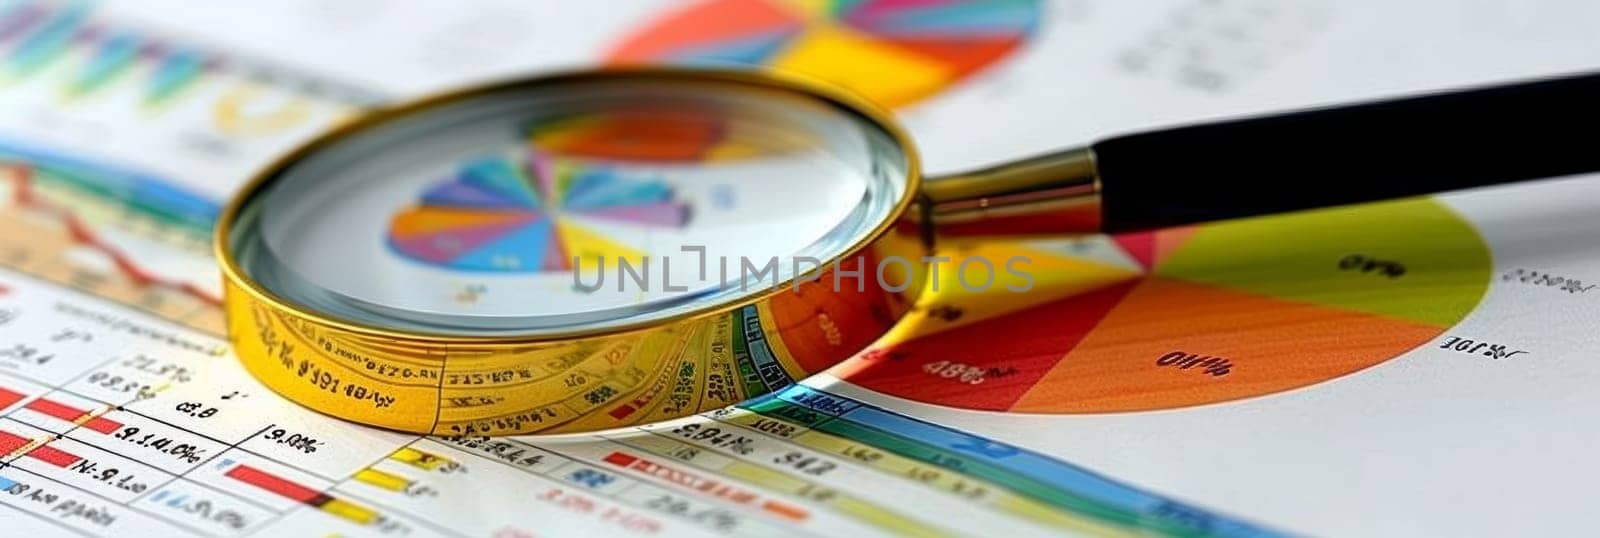 A magnifying glass hovers over colorful financial charts and graphs, highlighting the details and insights within the data. by sfinks